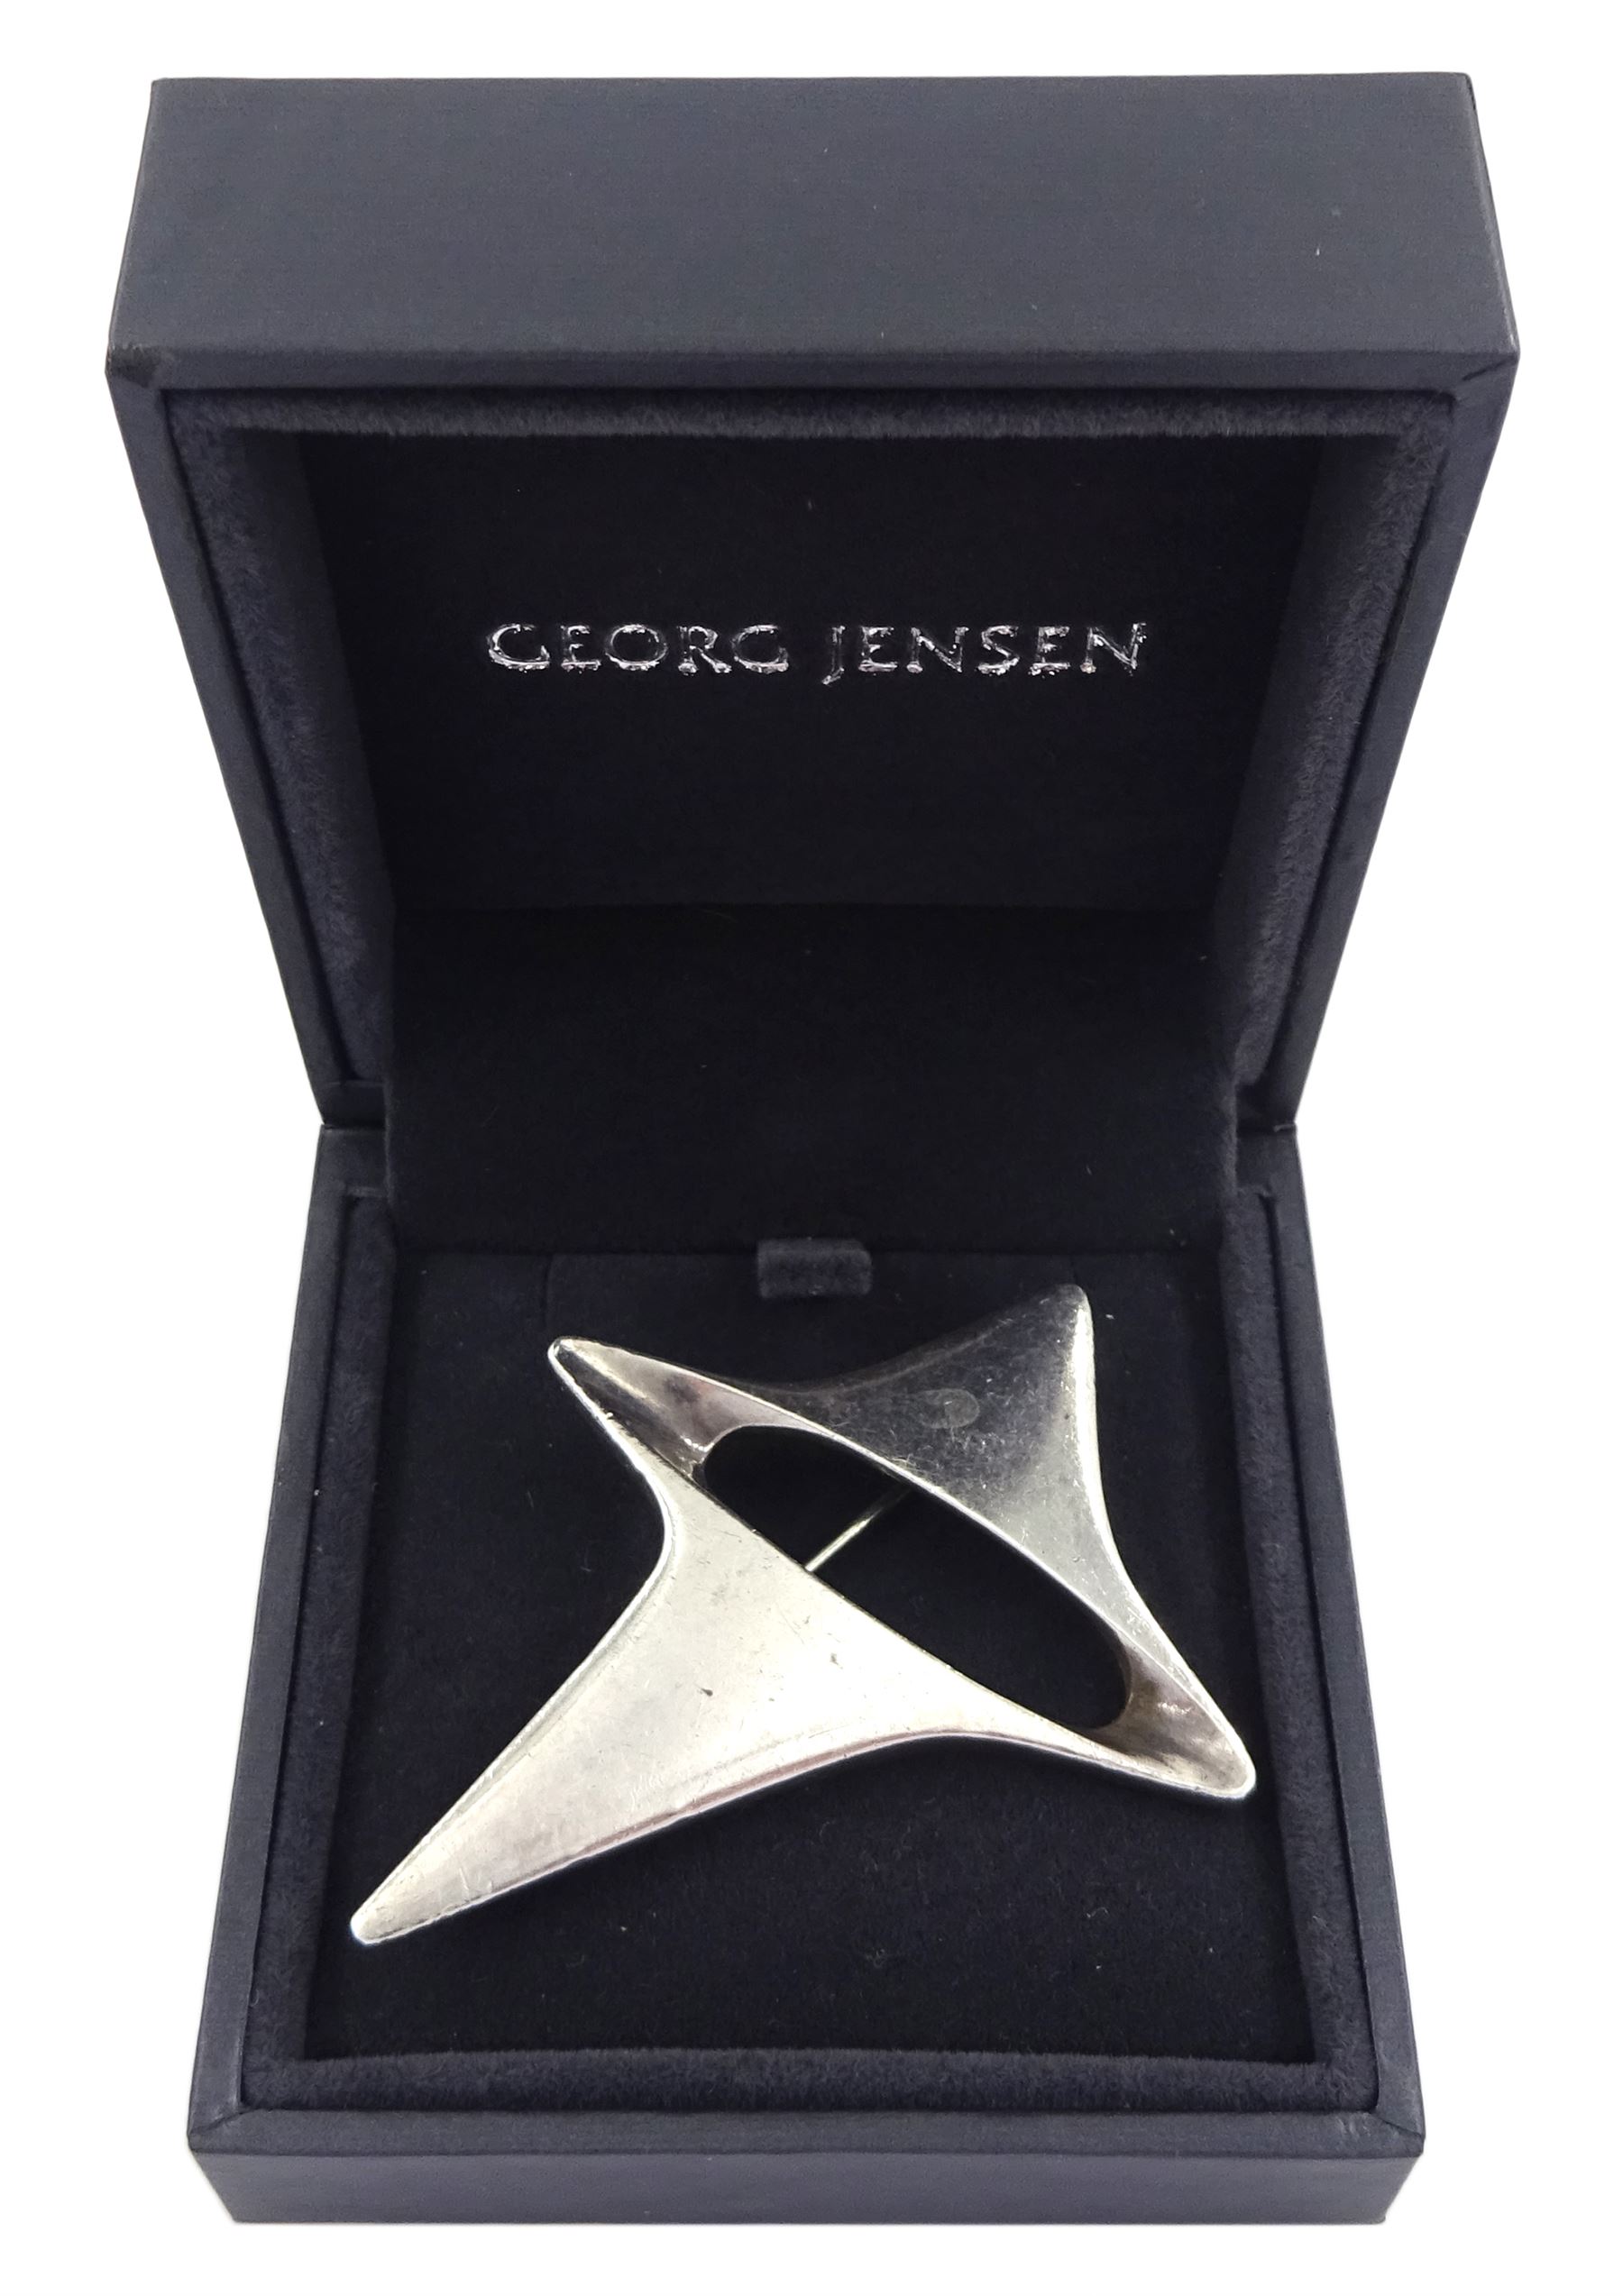 Georg Jensen silver abstract star brooch - Image 2 of 4